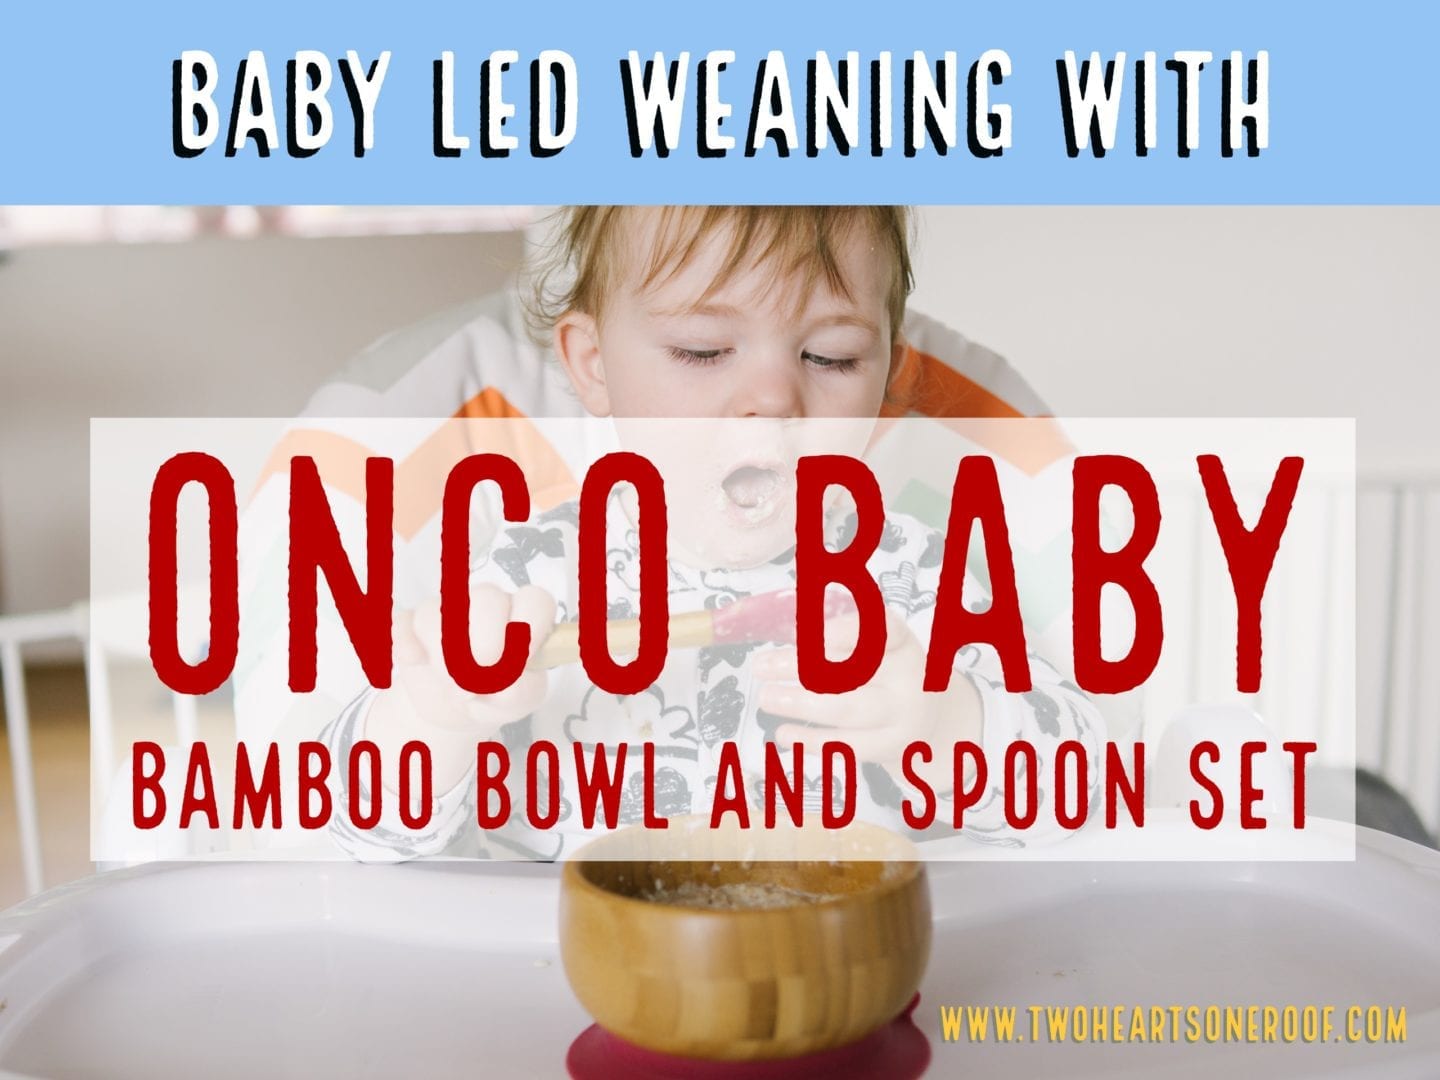 Baby Led Weaning with Onco Baby Bamboo Bowl and Spoon Set